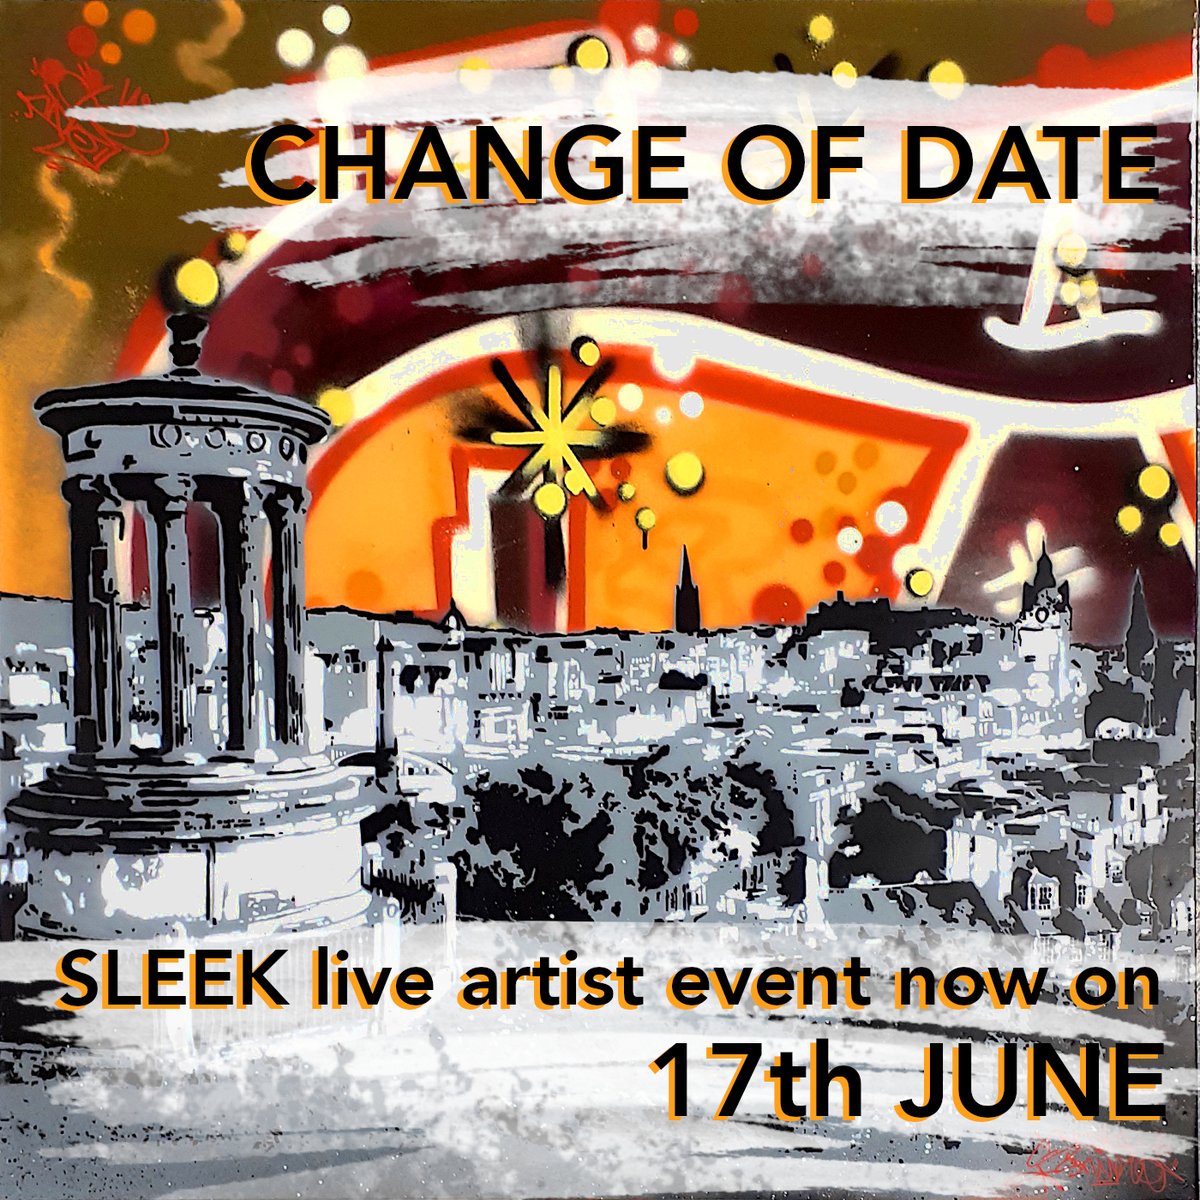 Unfortunately, our planned live event with Sleek cannot take place today, so we are postponing until next Saturday, the 17th. We look forward to seeing everyone in a week's time!
#edinburghart #streetart #graffiti #scottishartist #scottishart #ntartmonth